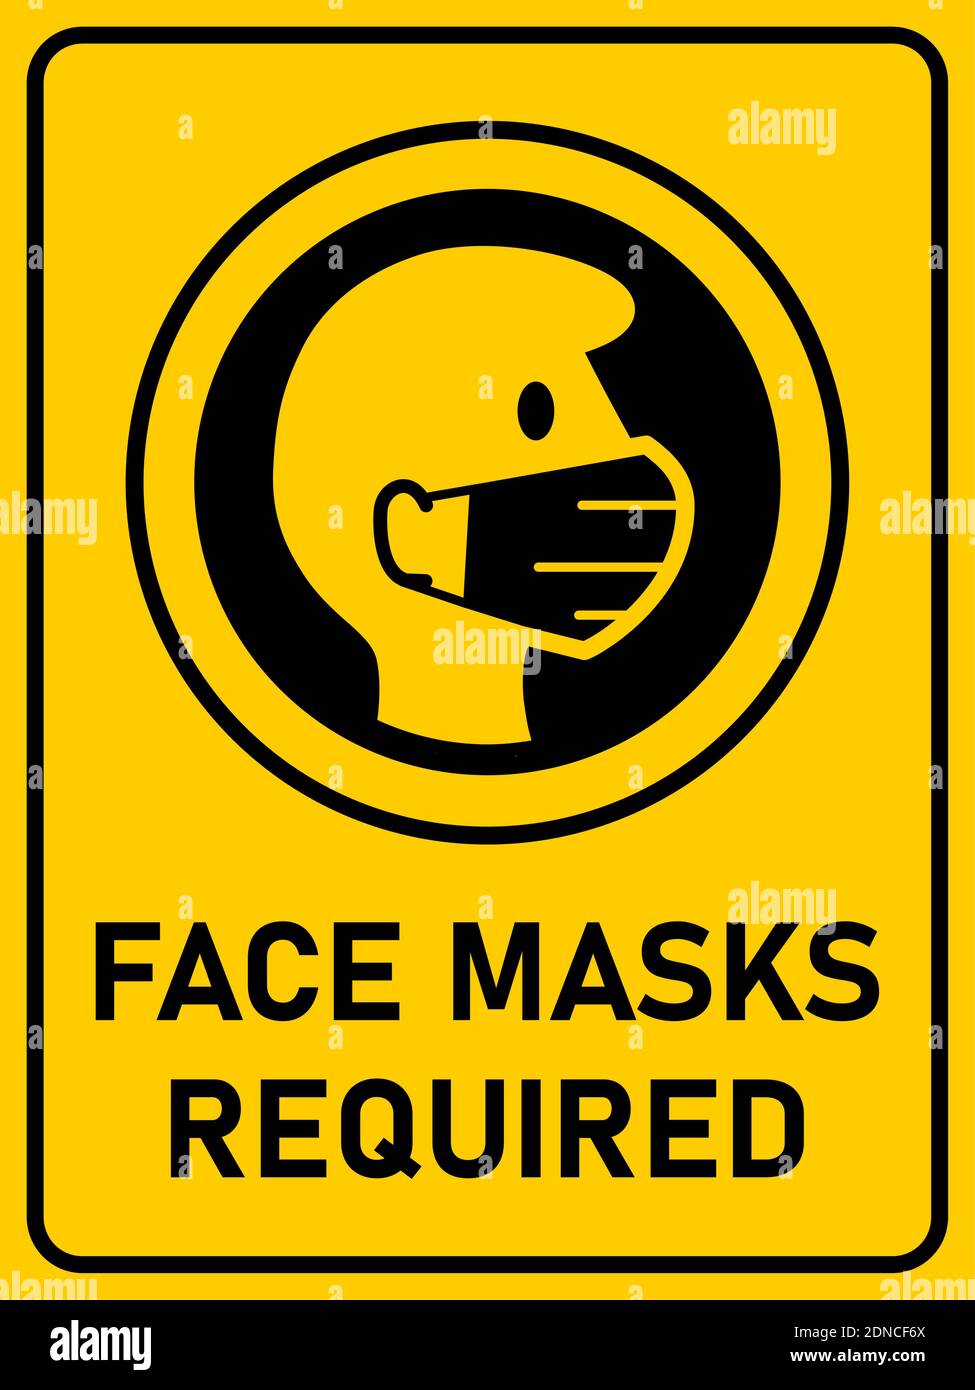 Face Masks Required Vertical Instruction Sign against the Spread of the Novel Coronavirus Covid-19, with an Aspect Ratio of 3:4. Vector Image. Stock Vector